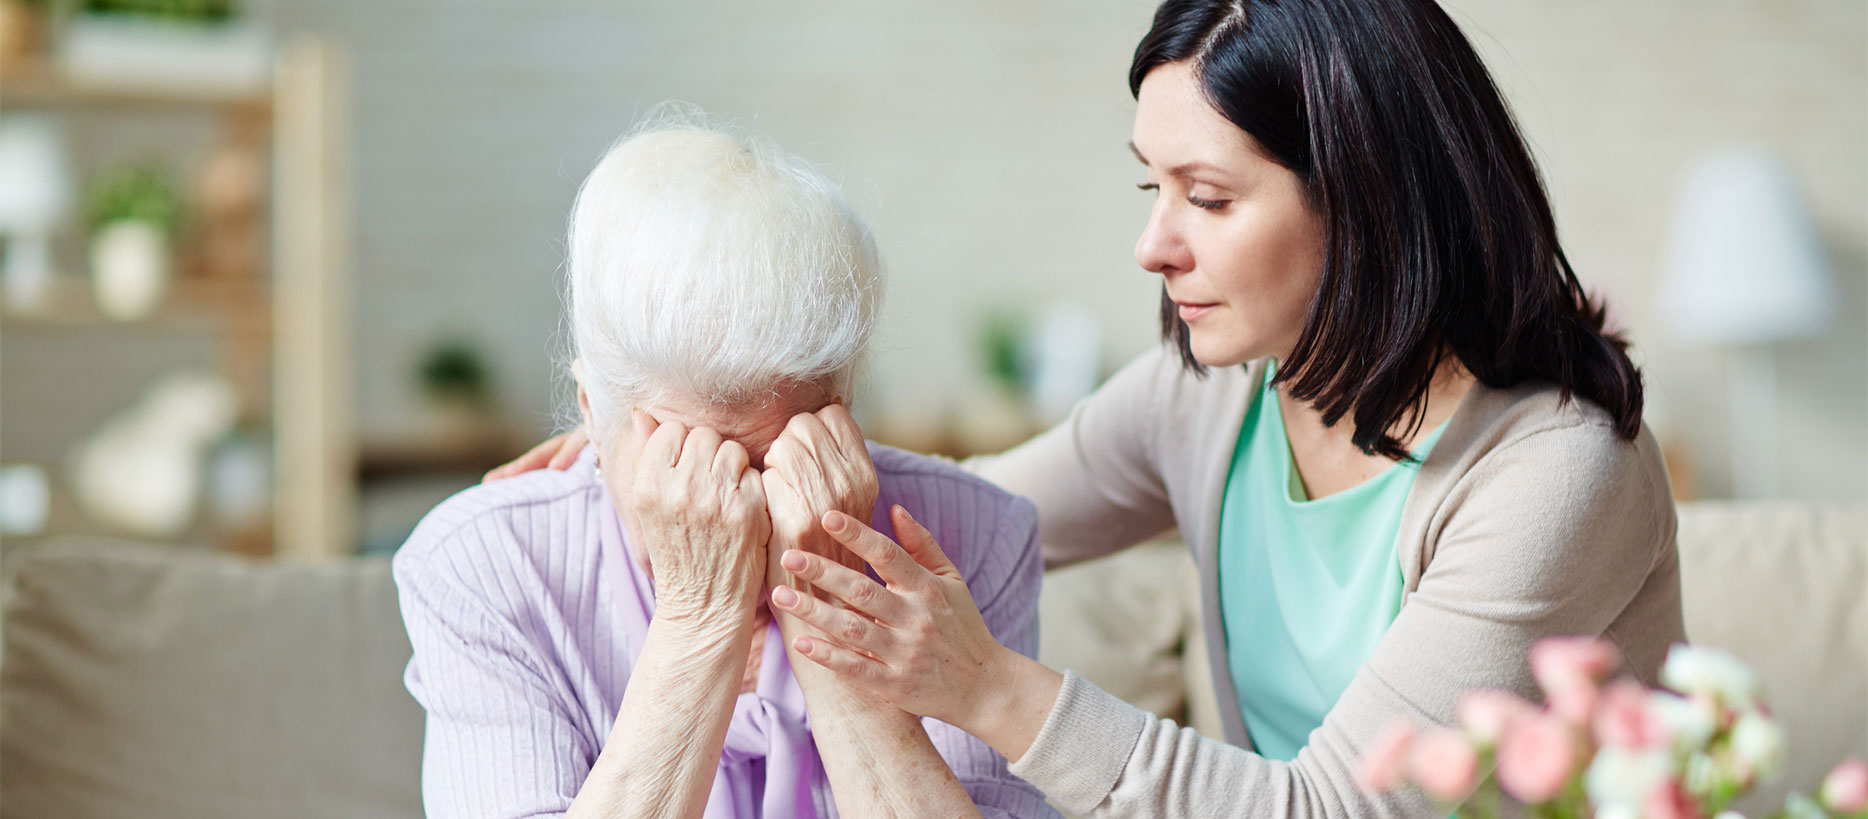 Woman consoling elderly woman, who is crying